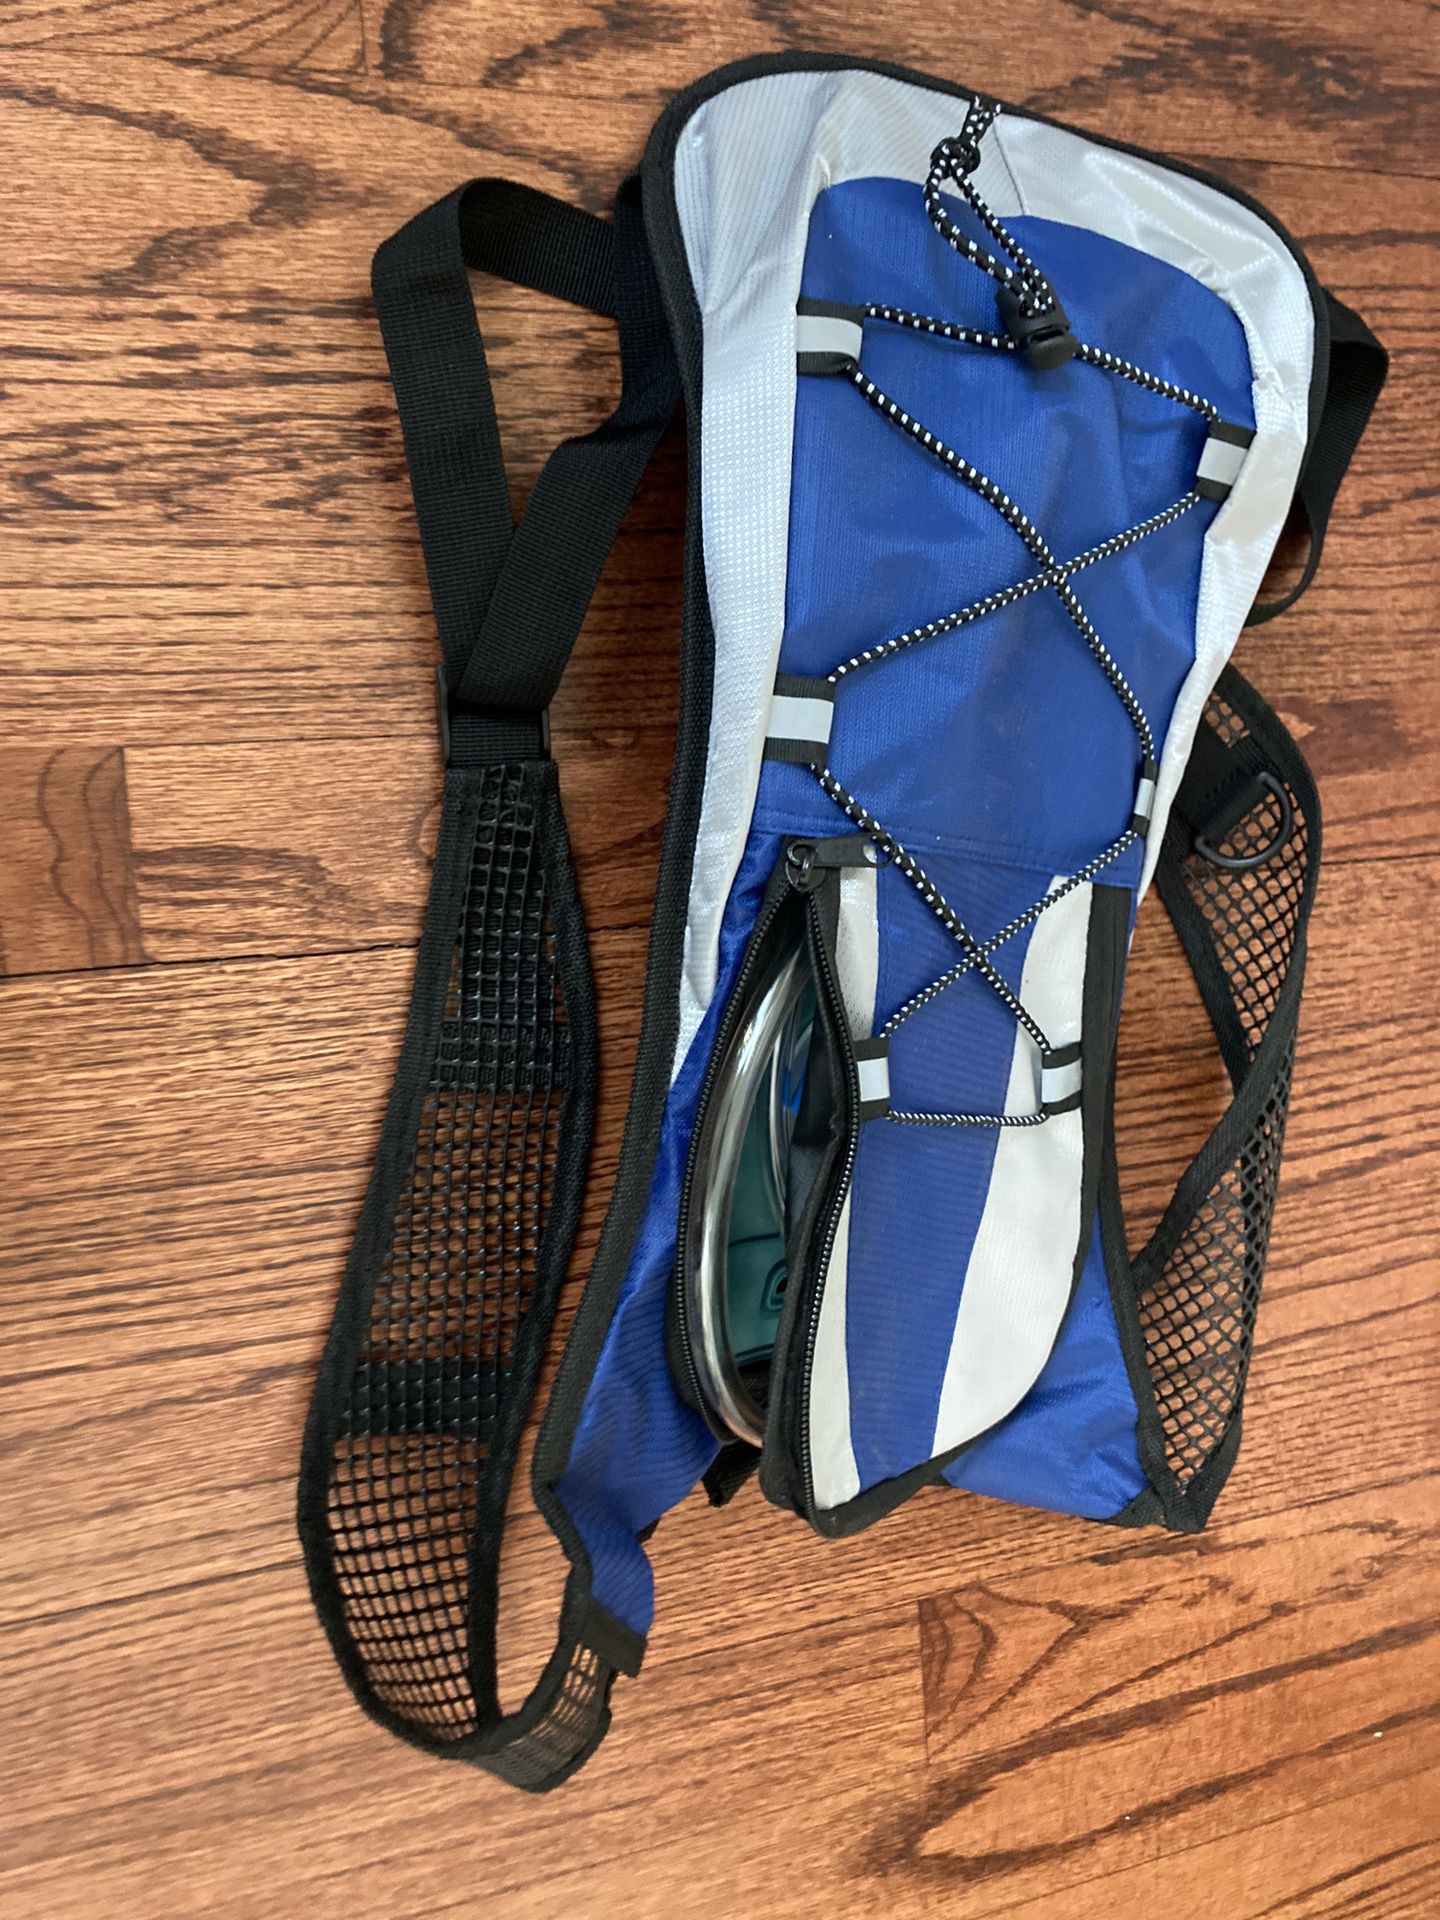 Camelback Water Backpack $15